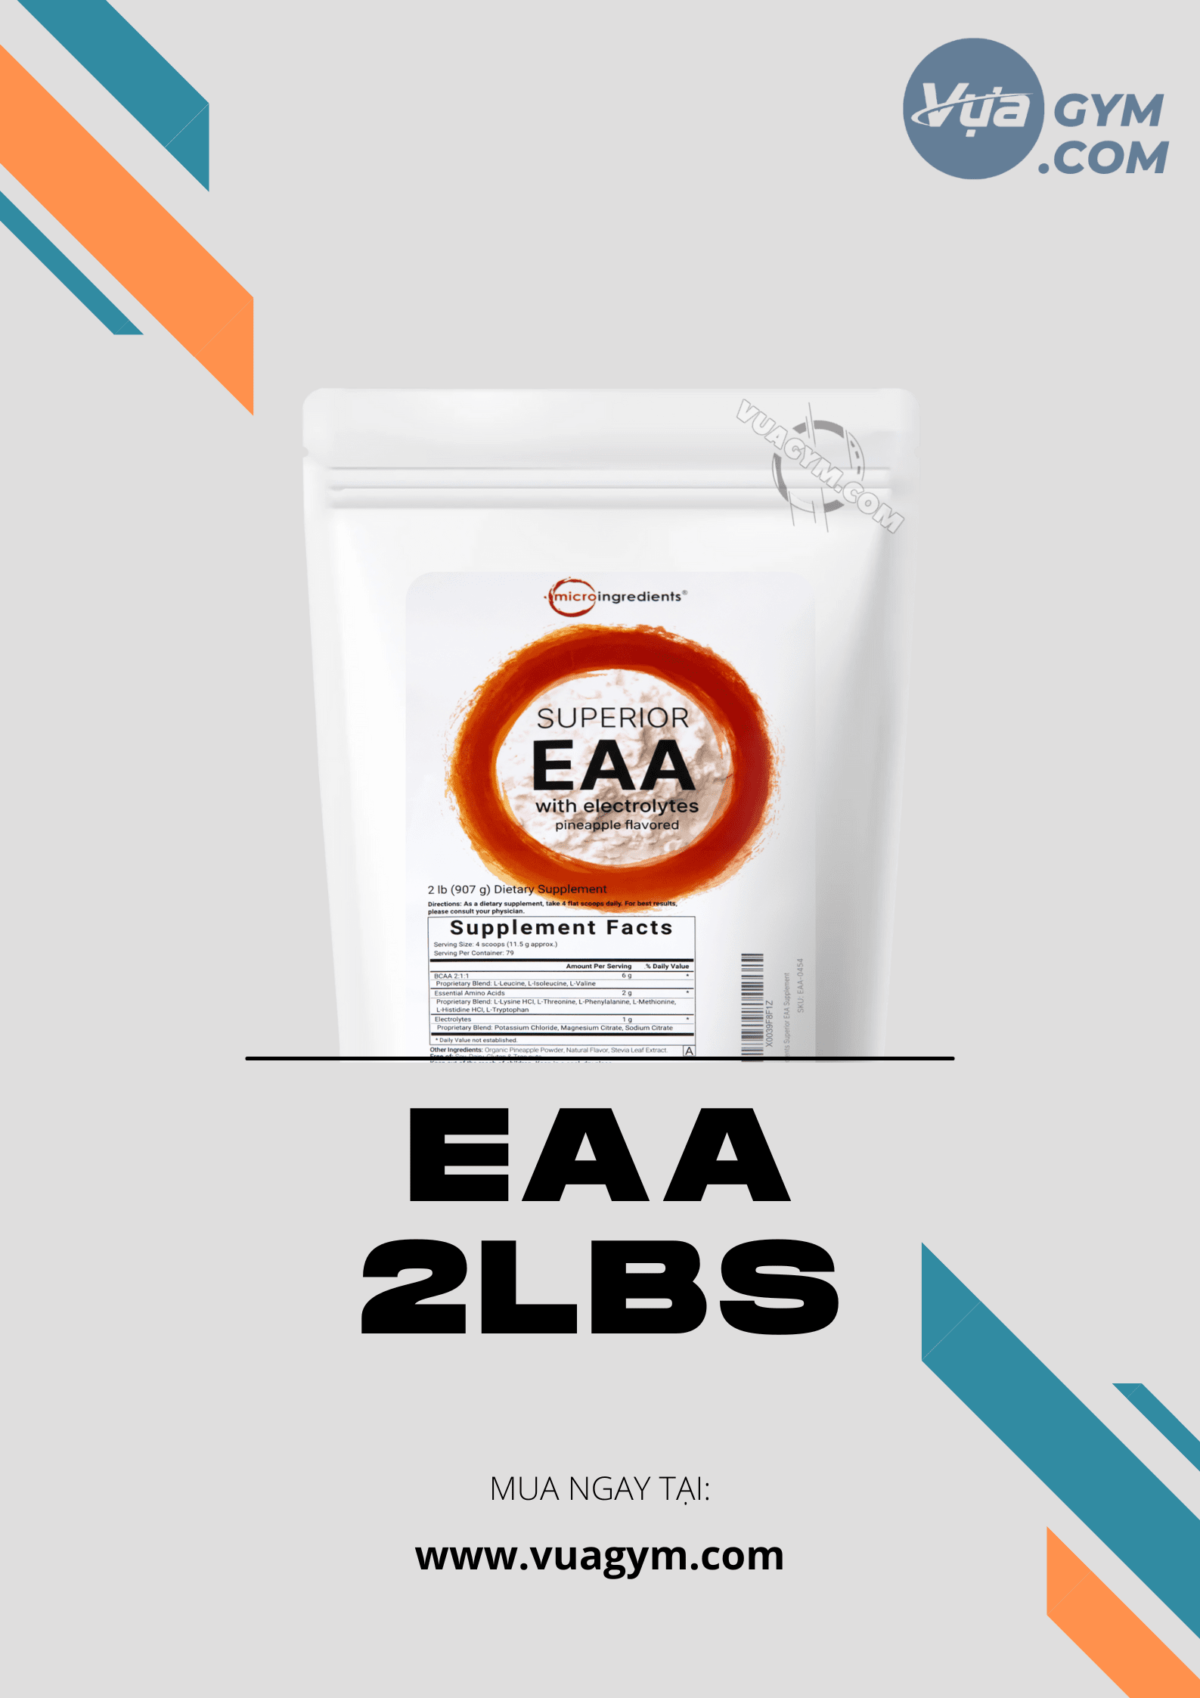 Micro Ingredients - Superior EAA with Electrolytes (2 Lbs) - eaa 2lbs